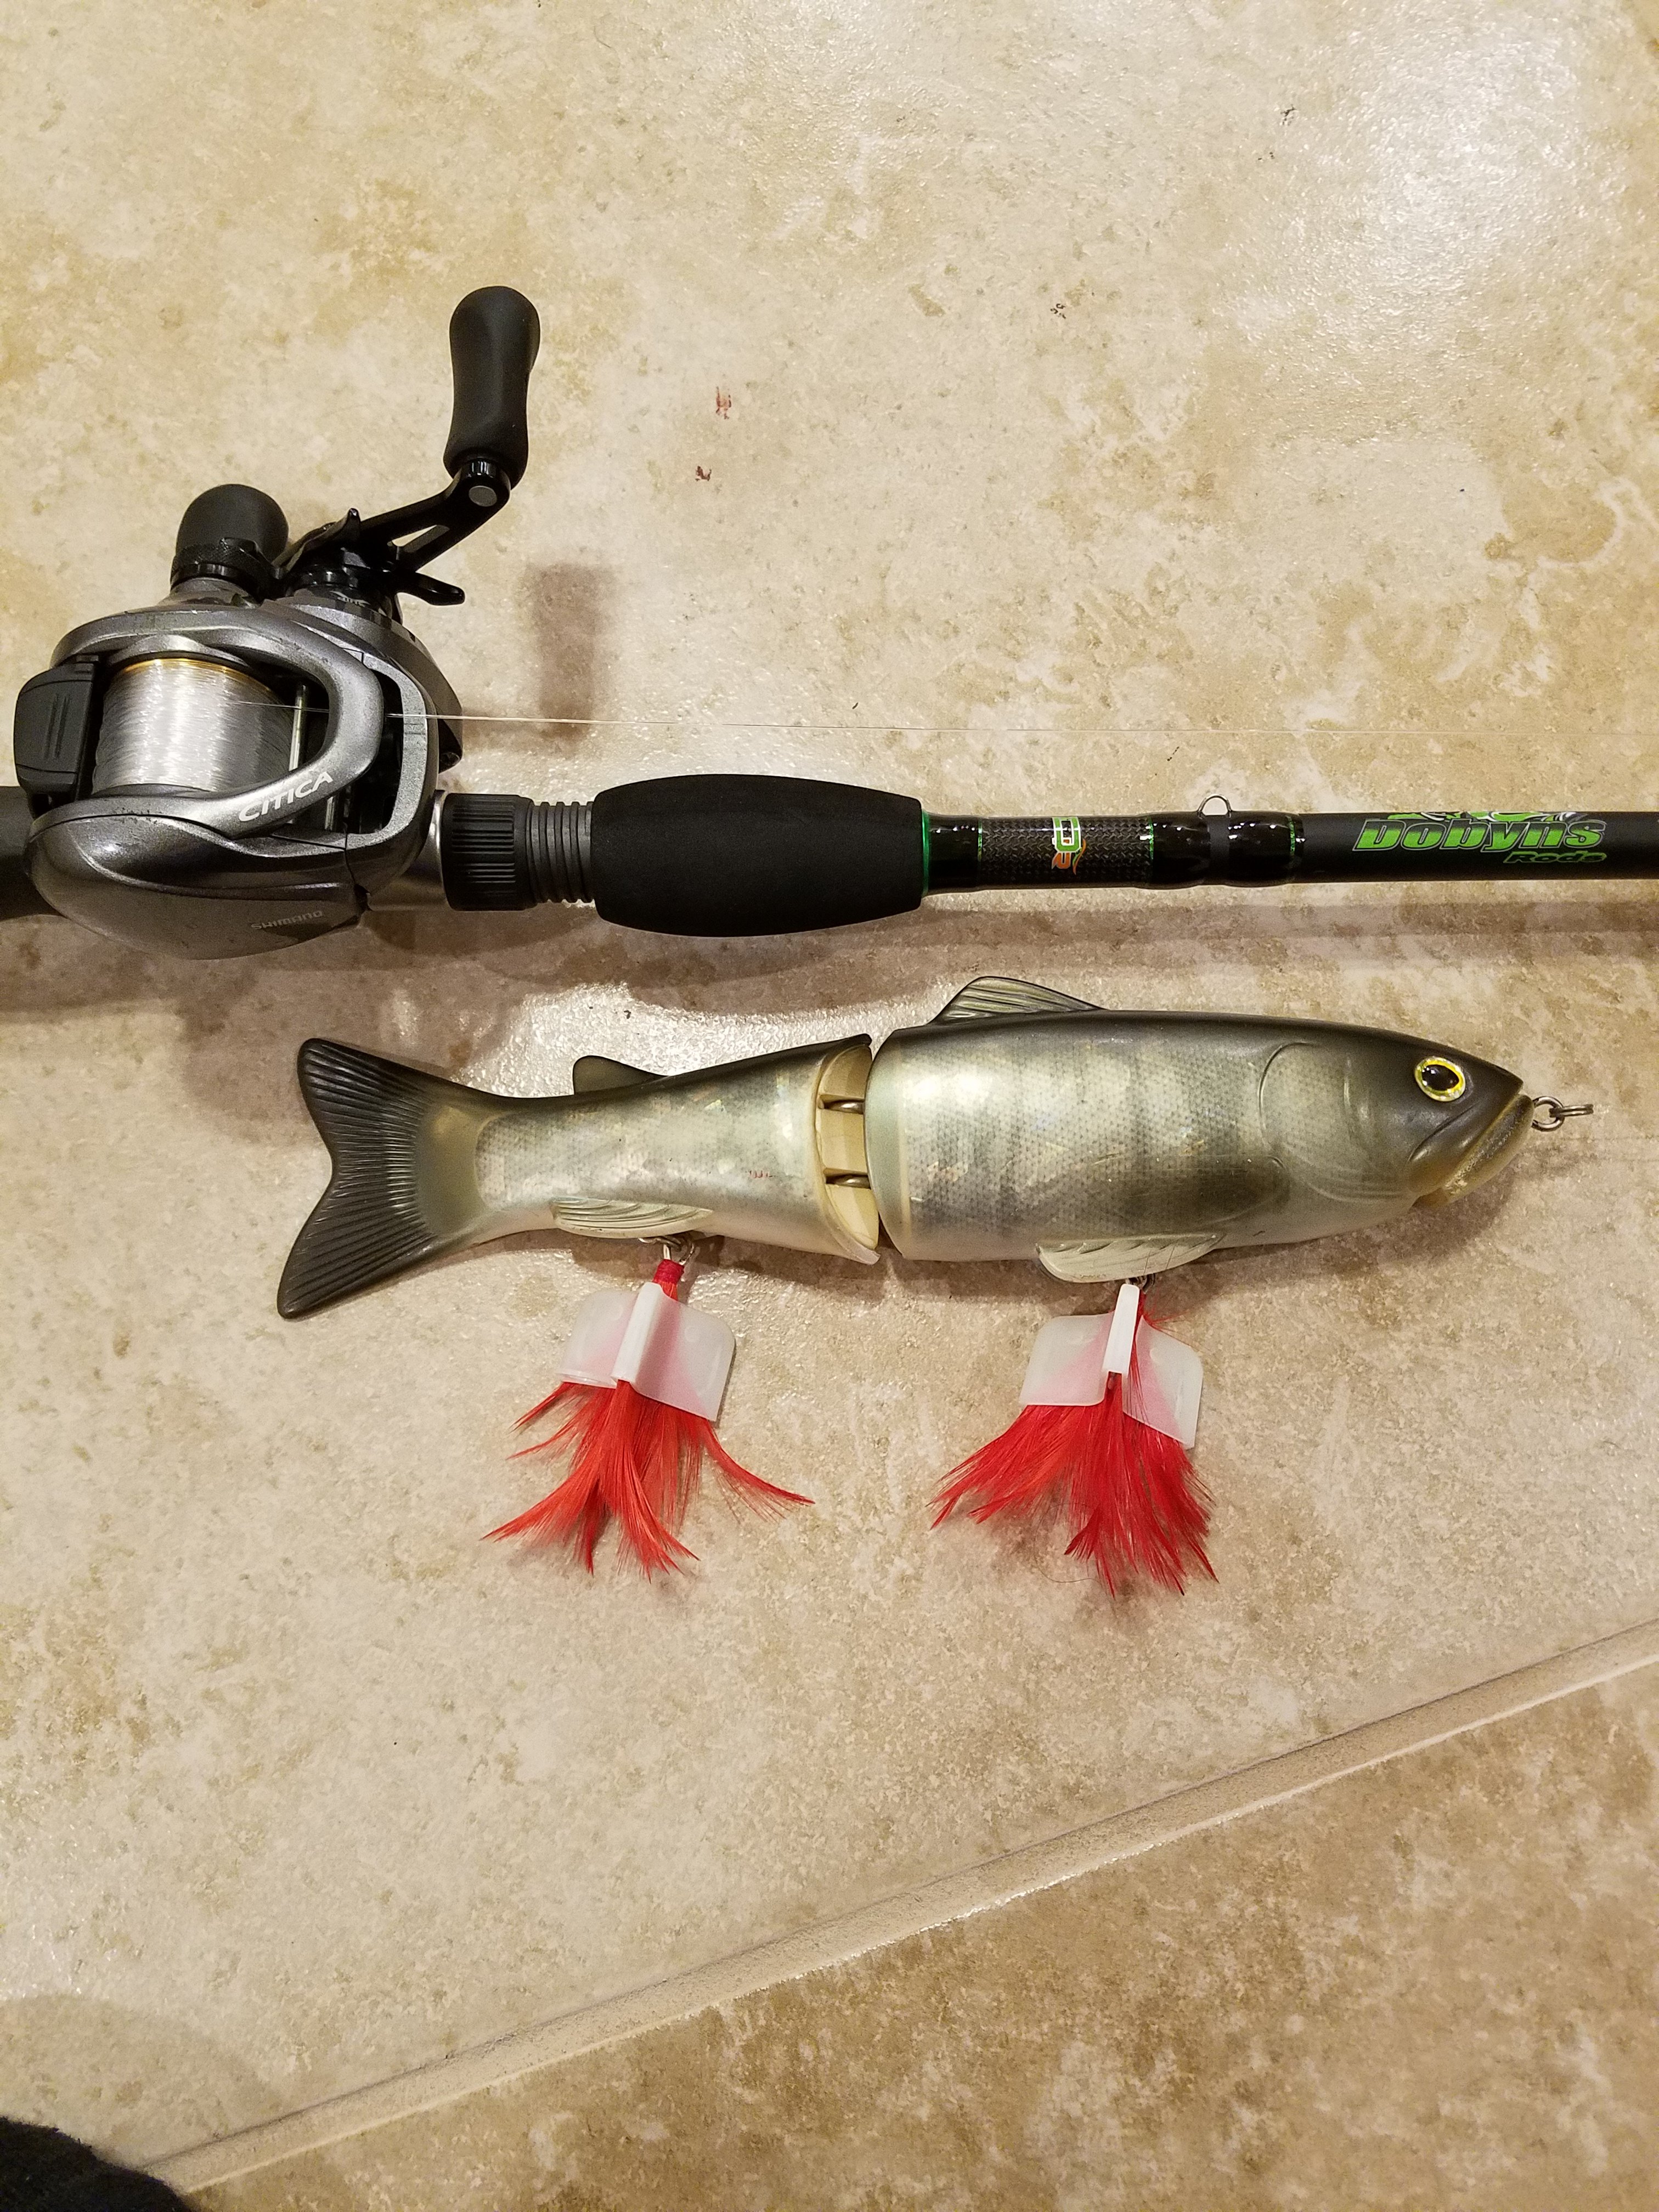 Show Off Your Swimbait Setup - Page 21 - The Underground 